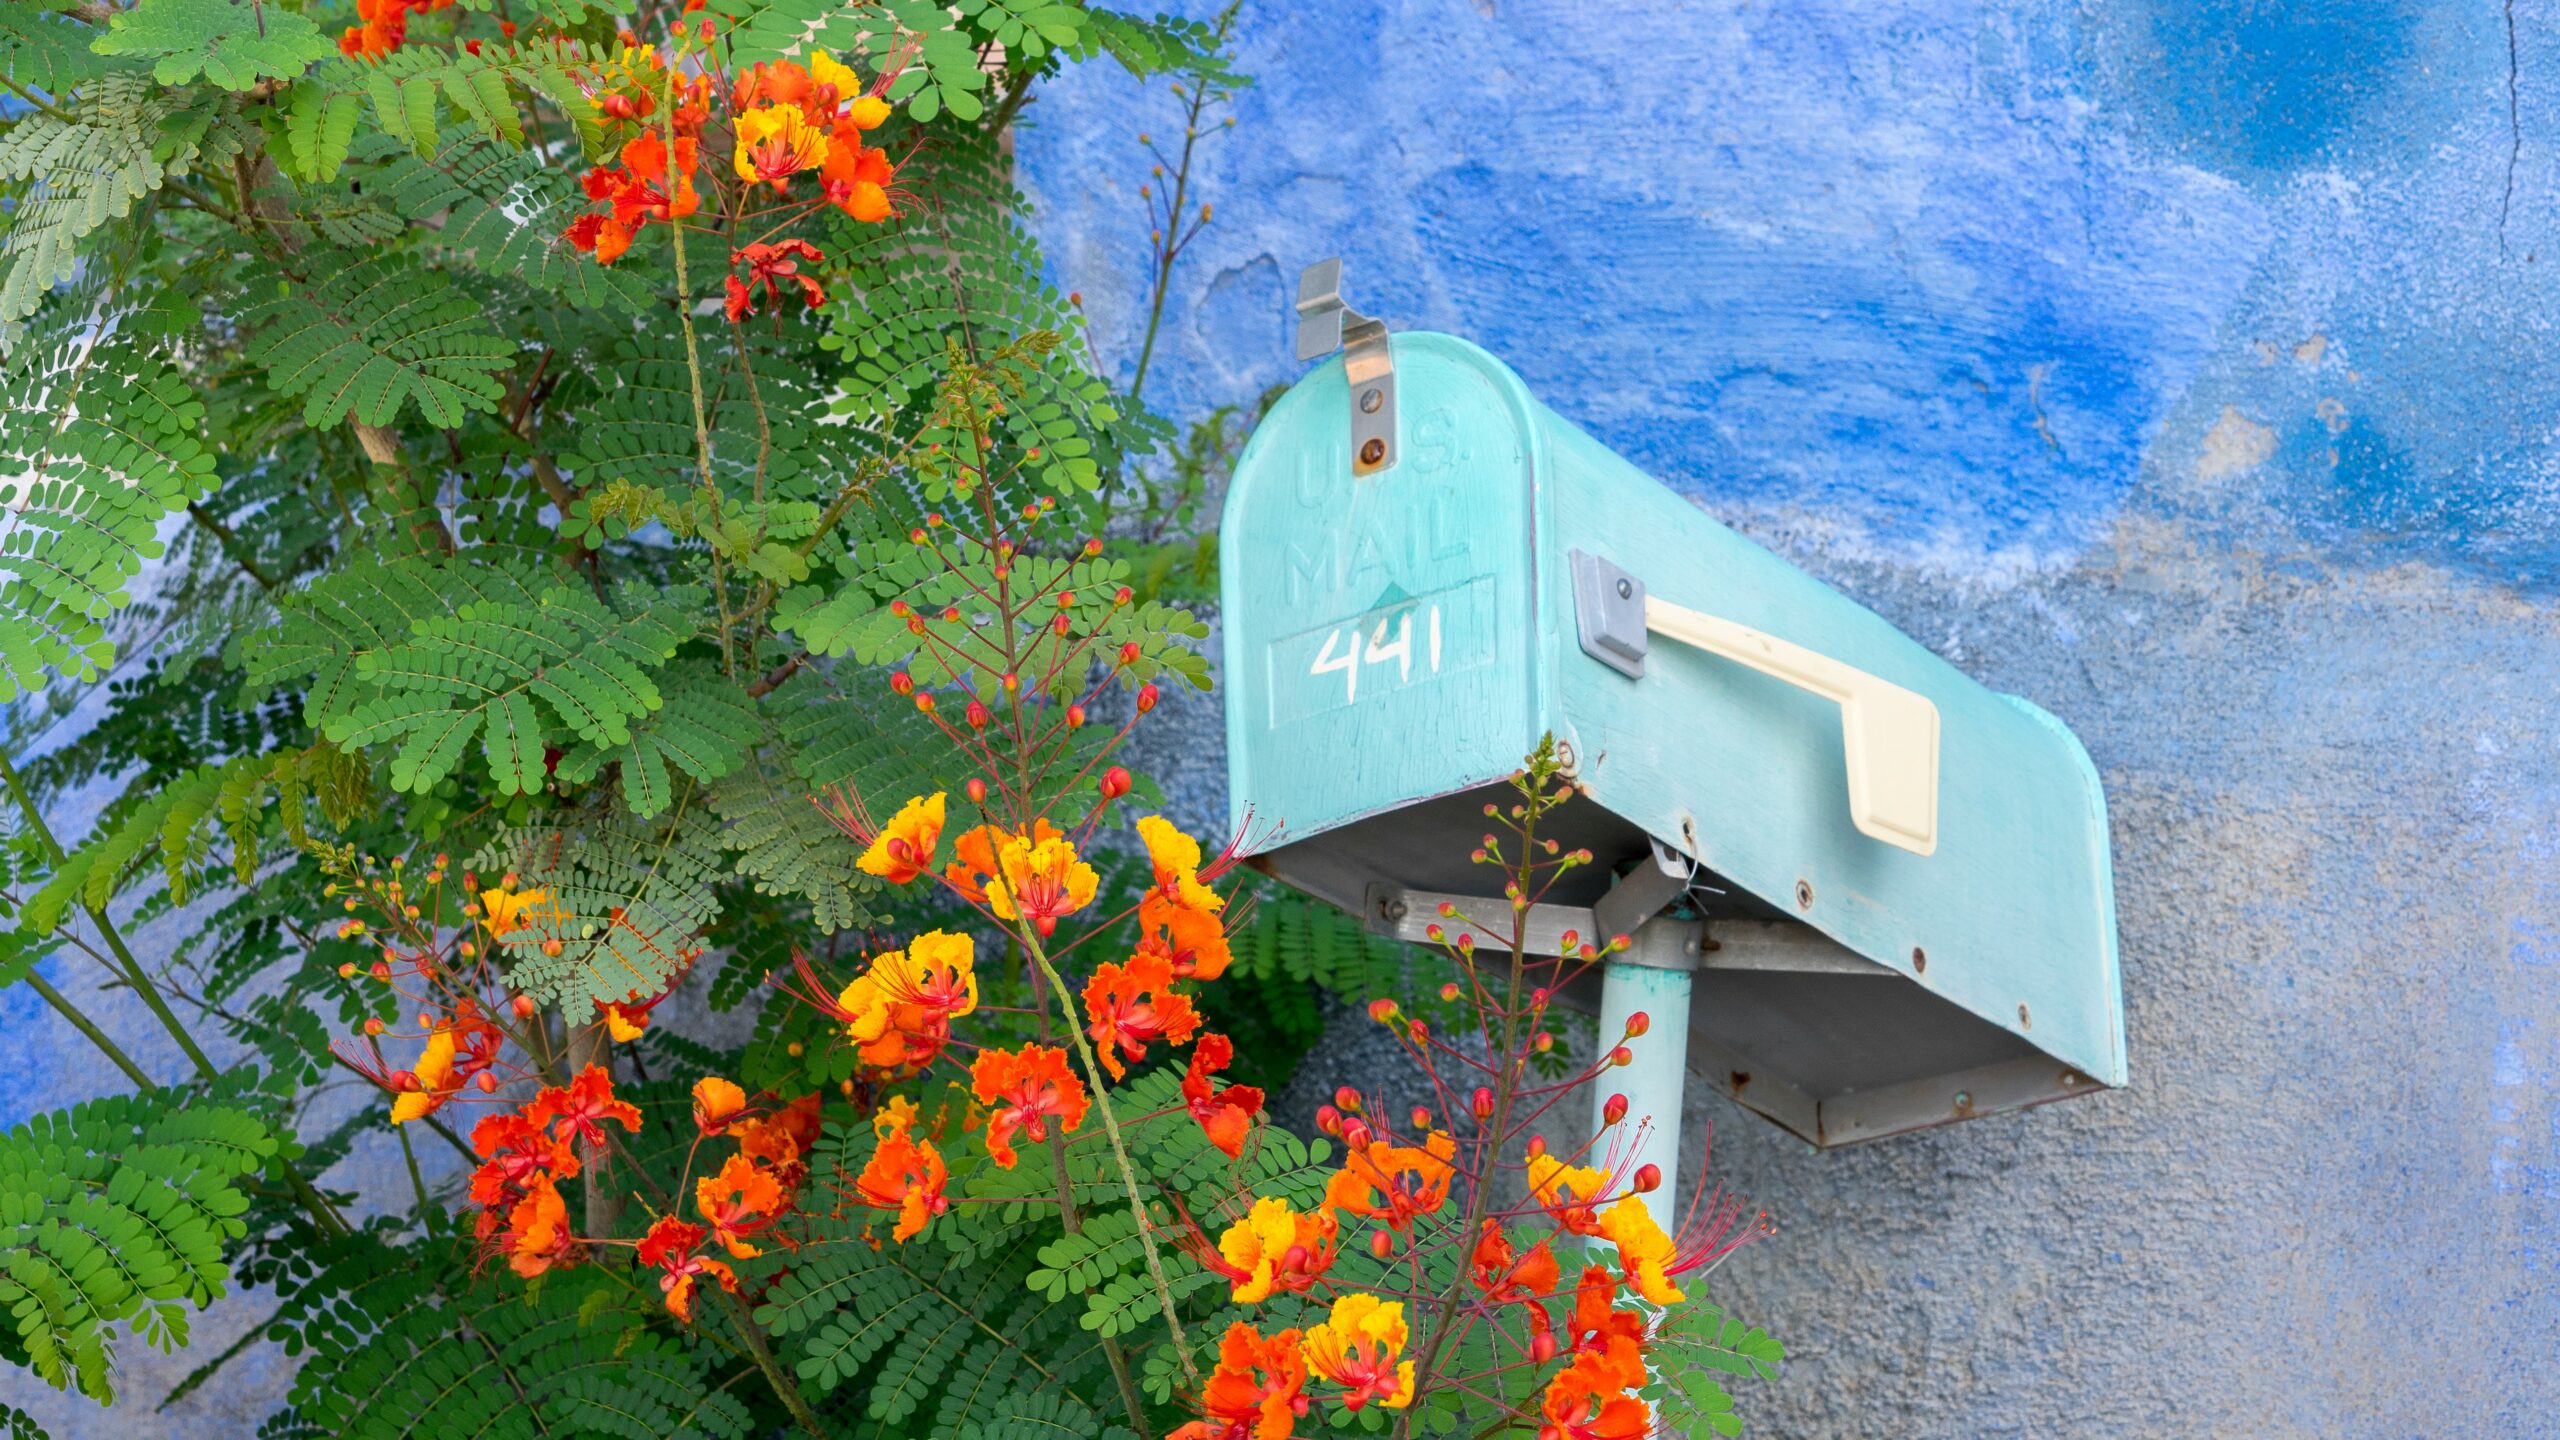 Mailbox with flowers